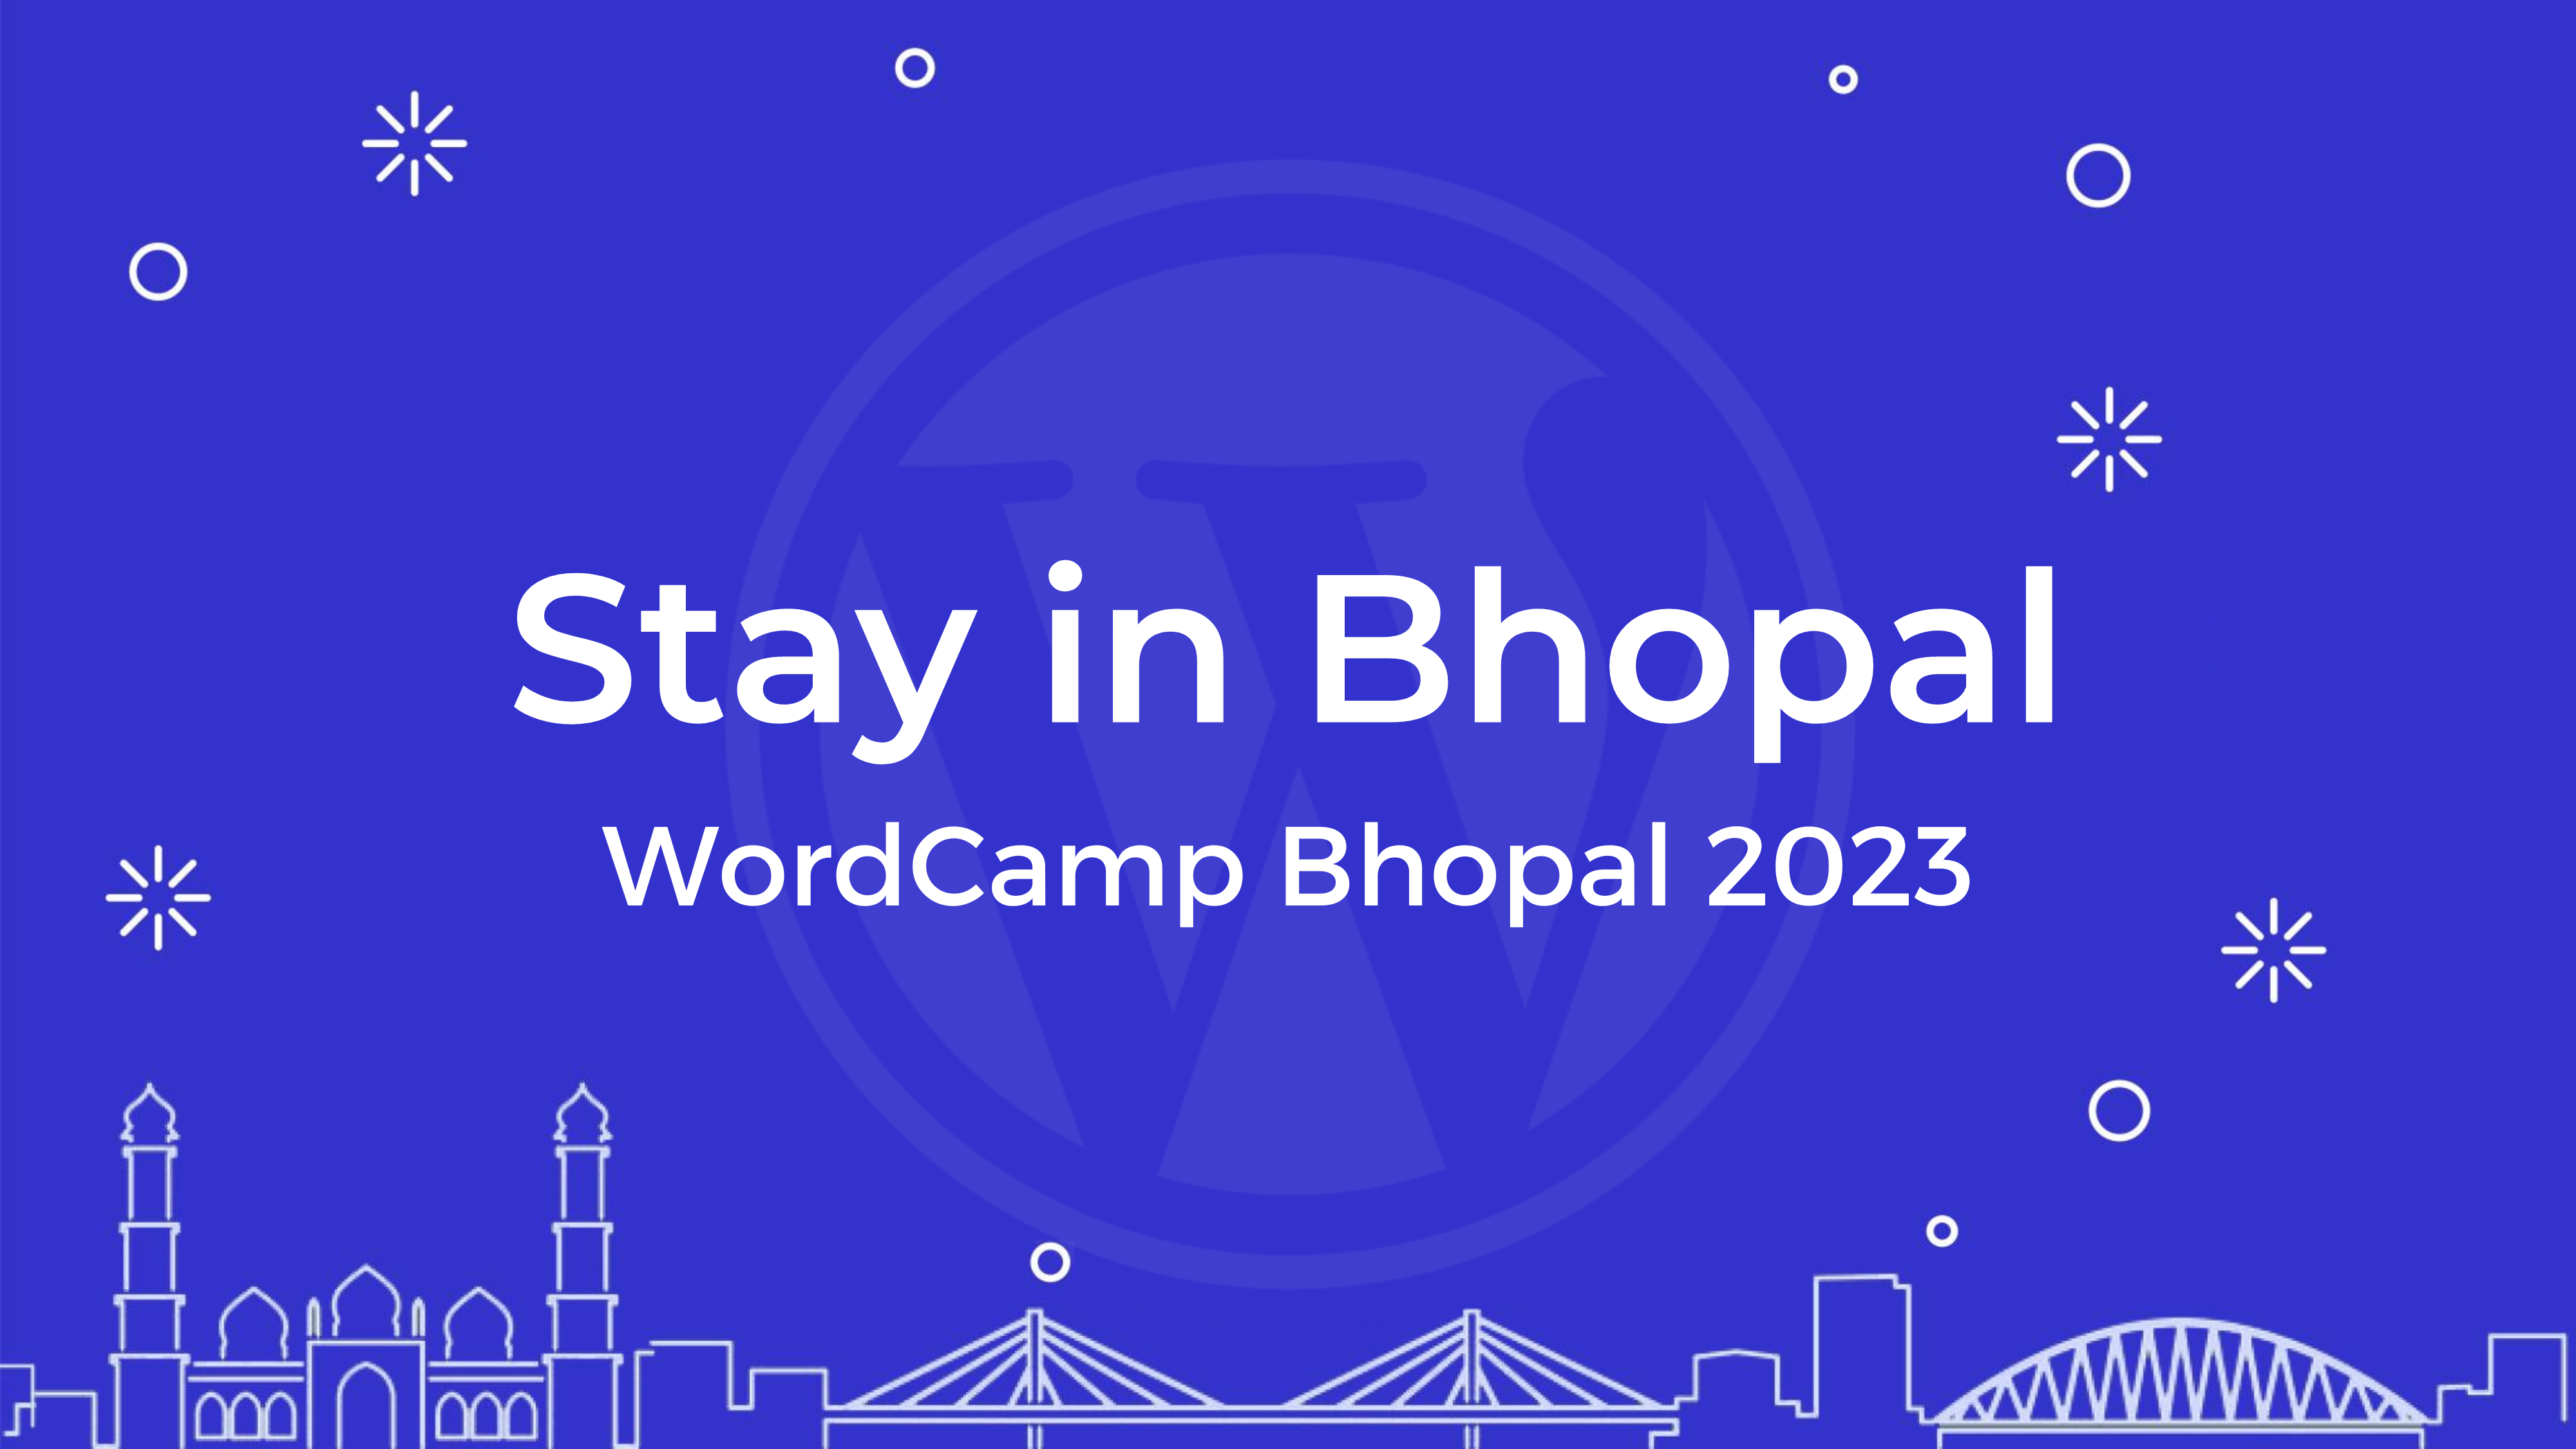 Where to Stay while attending #WCBhopal